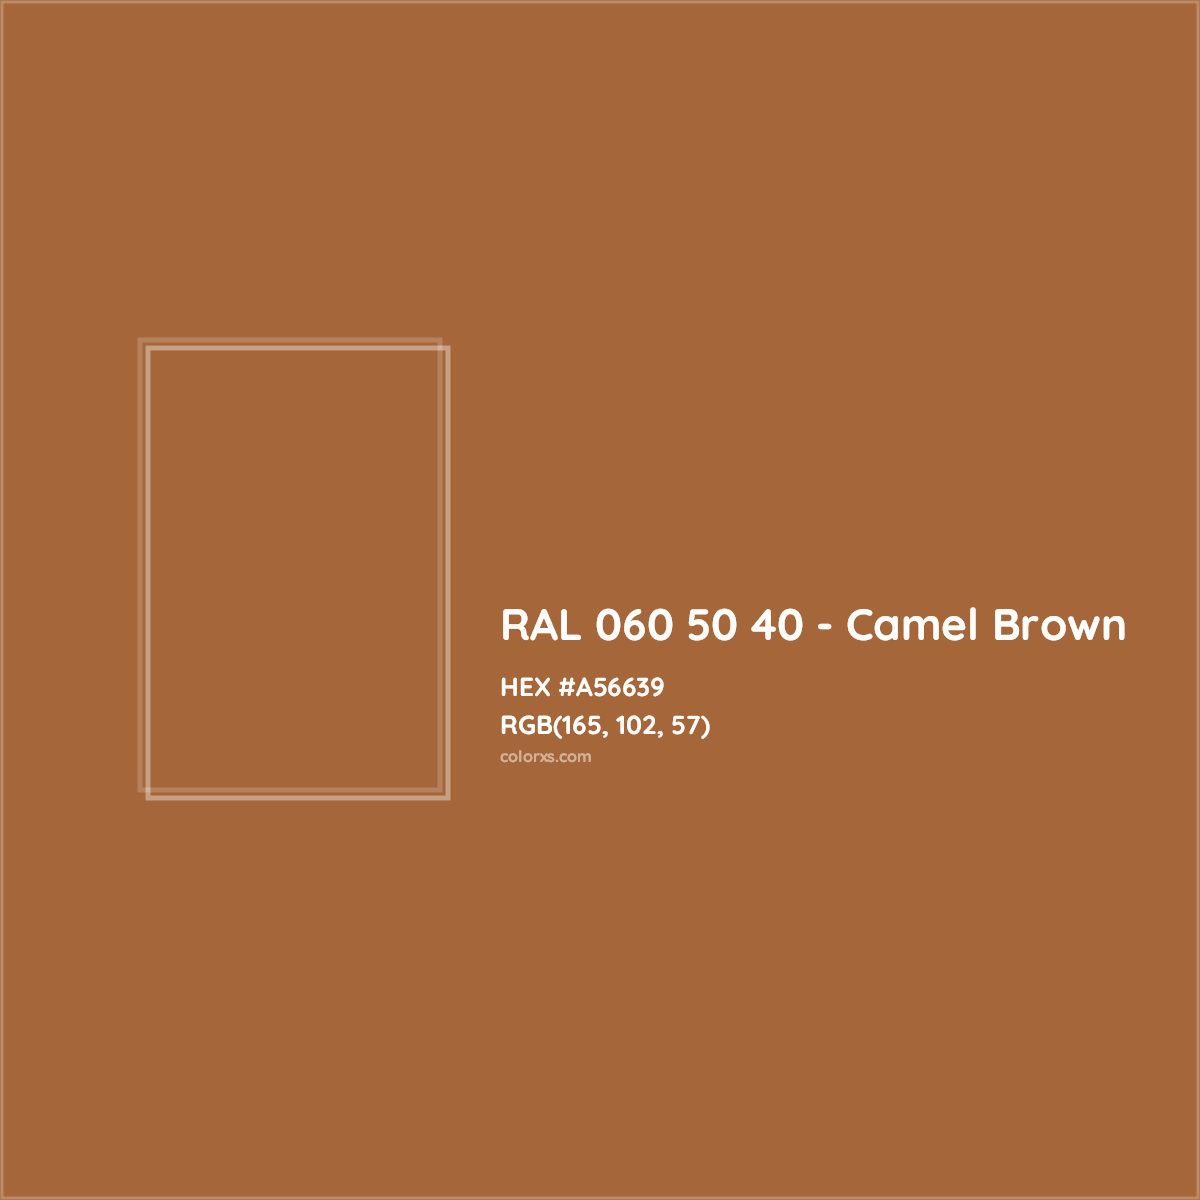 HEX #A56639 RAL 060 50 40 - Camel Brown CMS RAL Design - Color Code